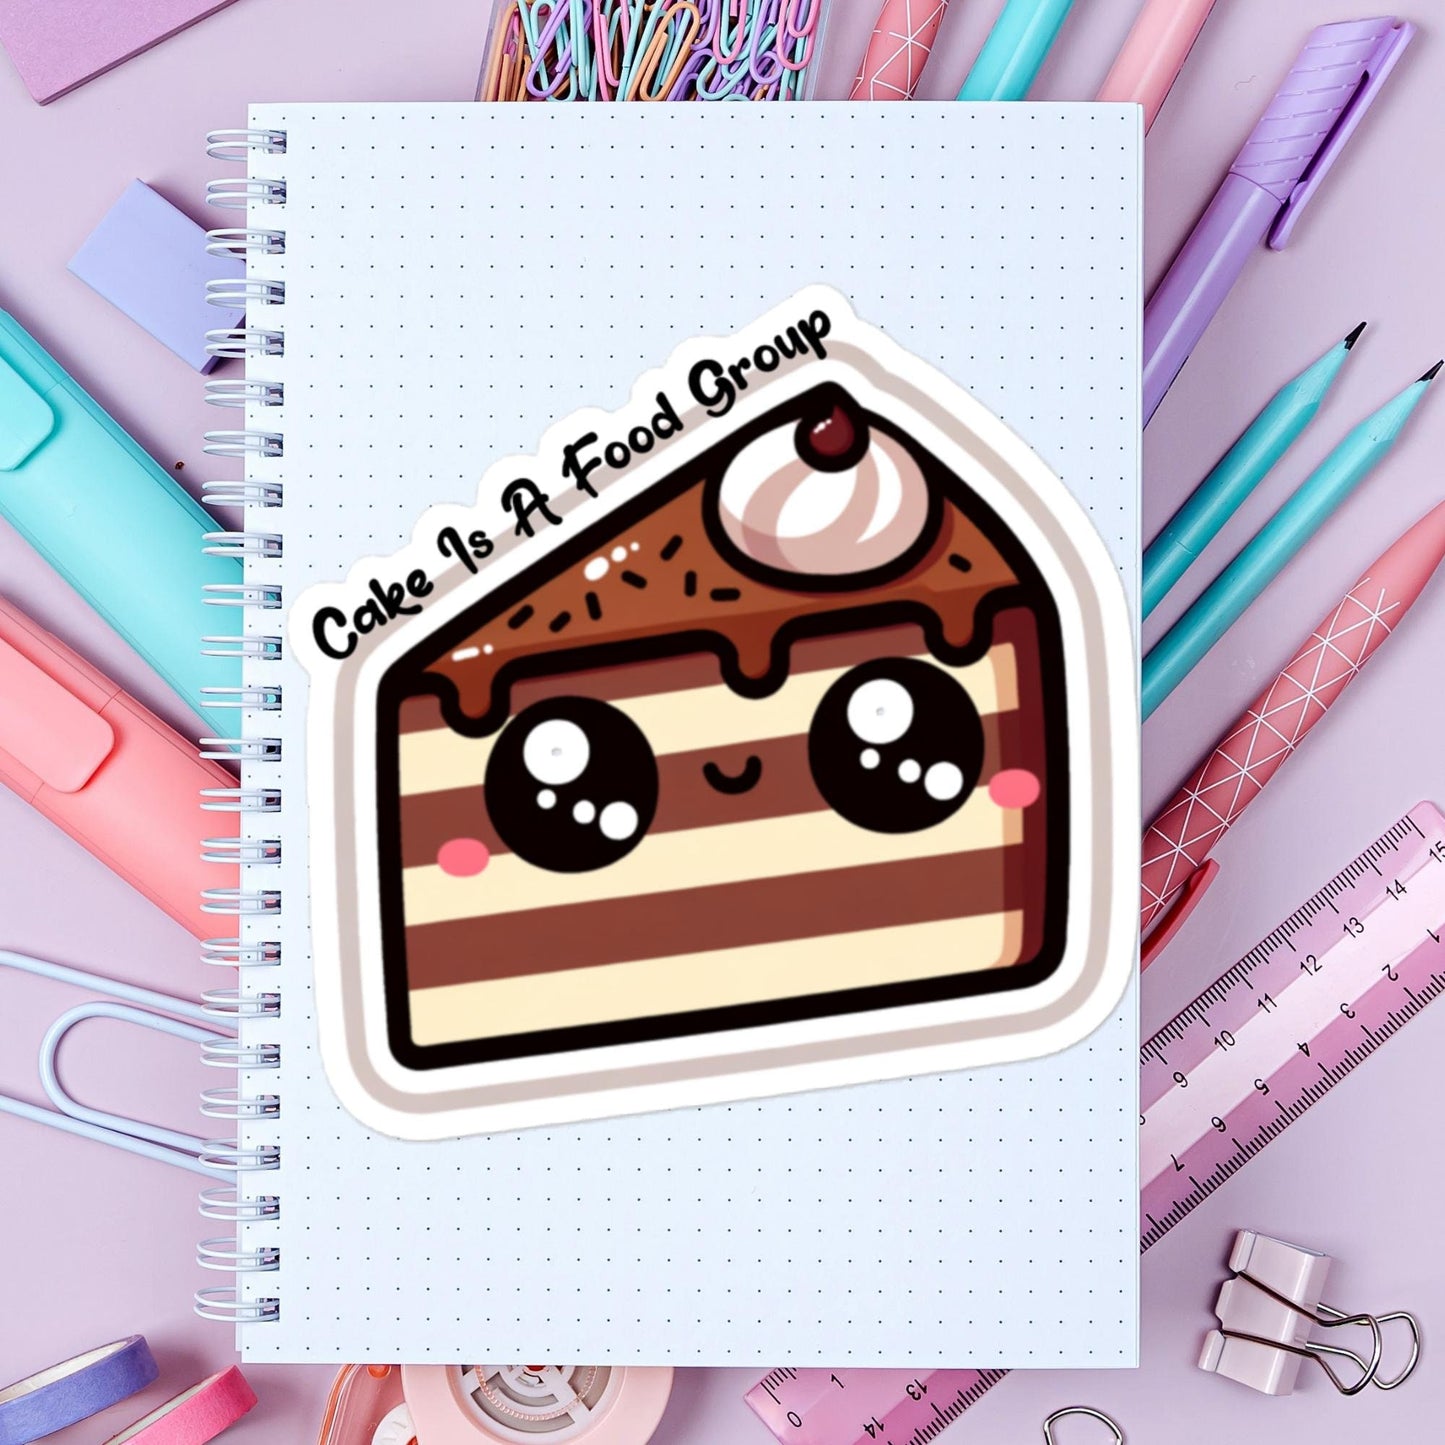 Stickers Cake Food Humor Stickers Baking Kitchen Gifts Stickers Baking Humor Stickers Kitchen